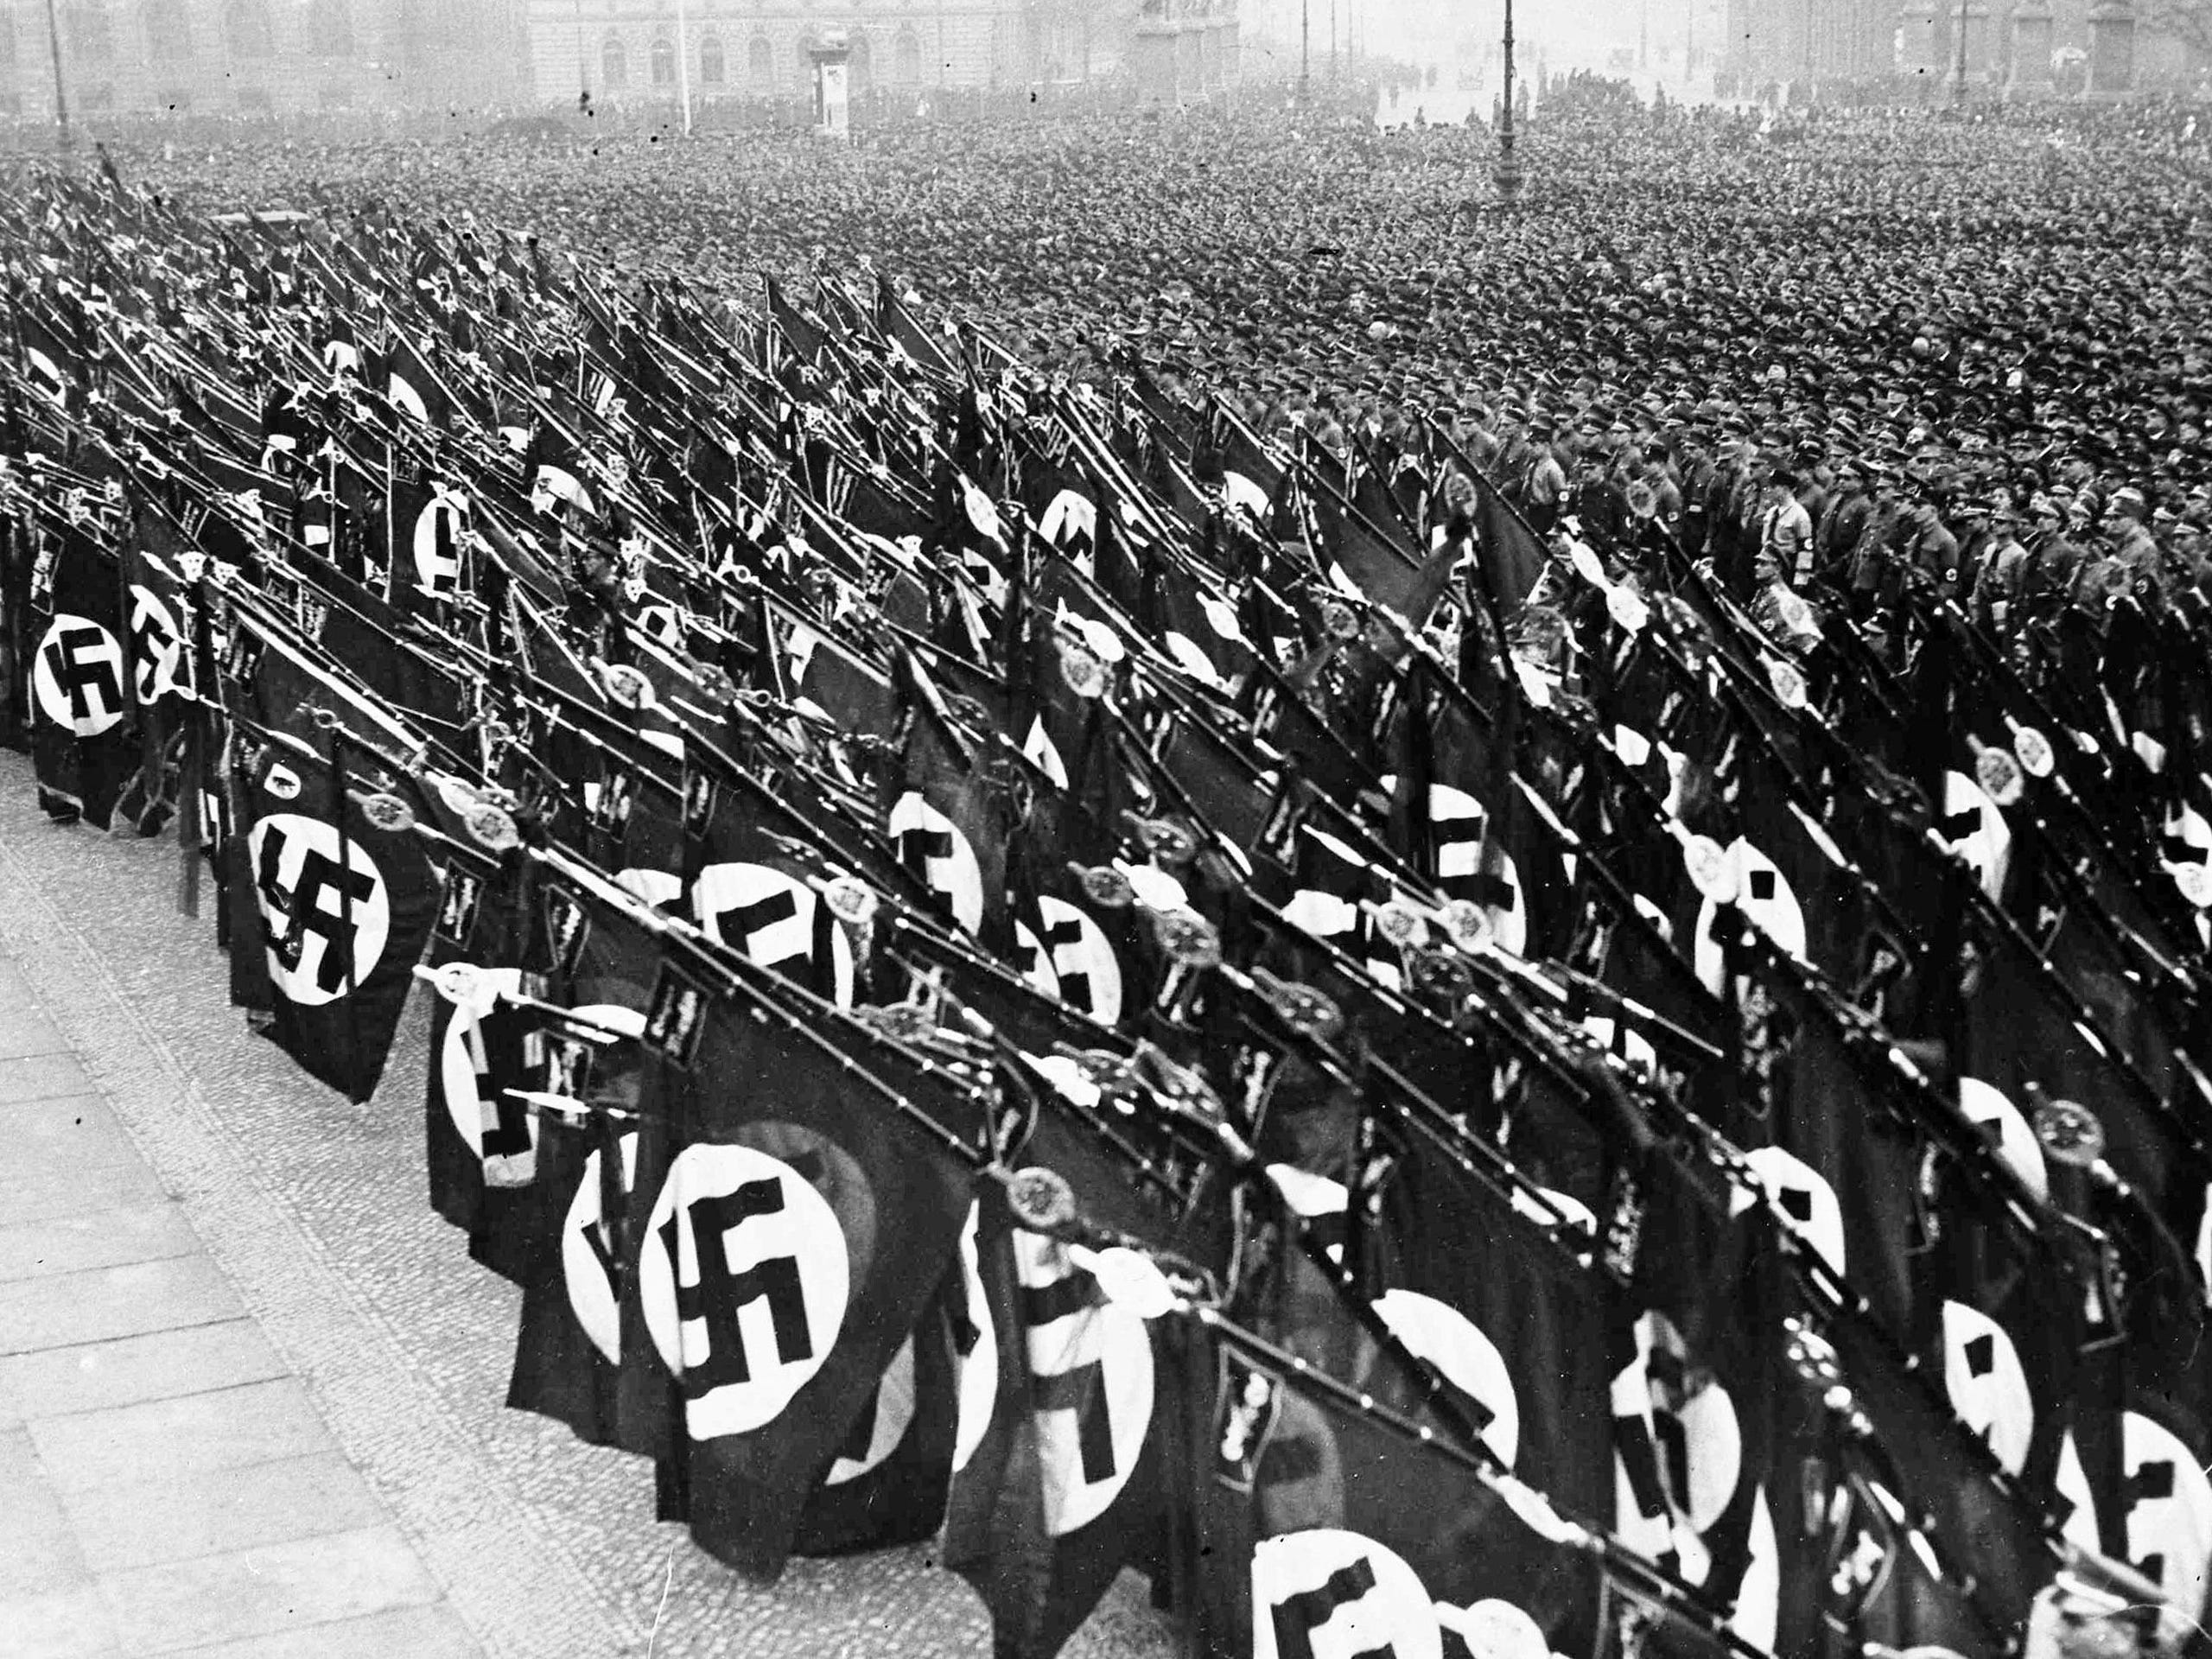 Tens of thousands of Nazi storm troopers take the oath of allegiance to Chancellor Adolf Hitler, in the Lustgarten, Berlin, Feb. 26, 1934. Nazi banners are dipped during the swearing of the oath.